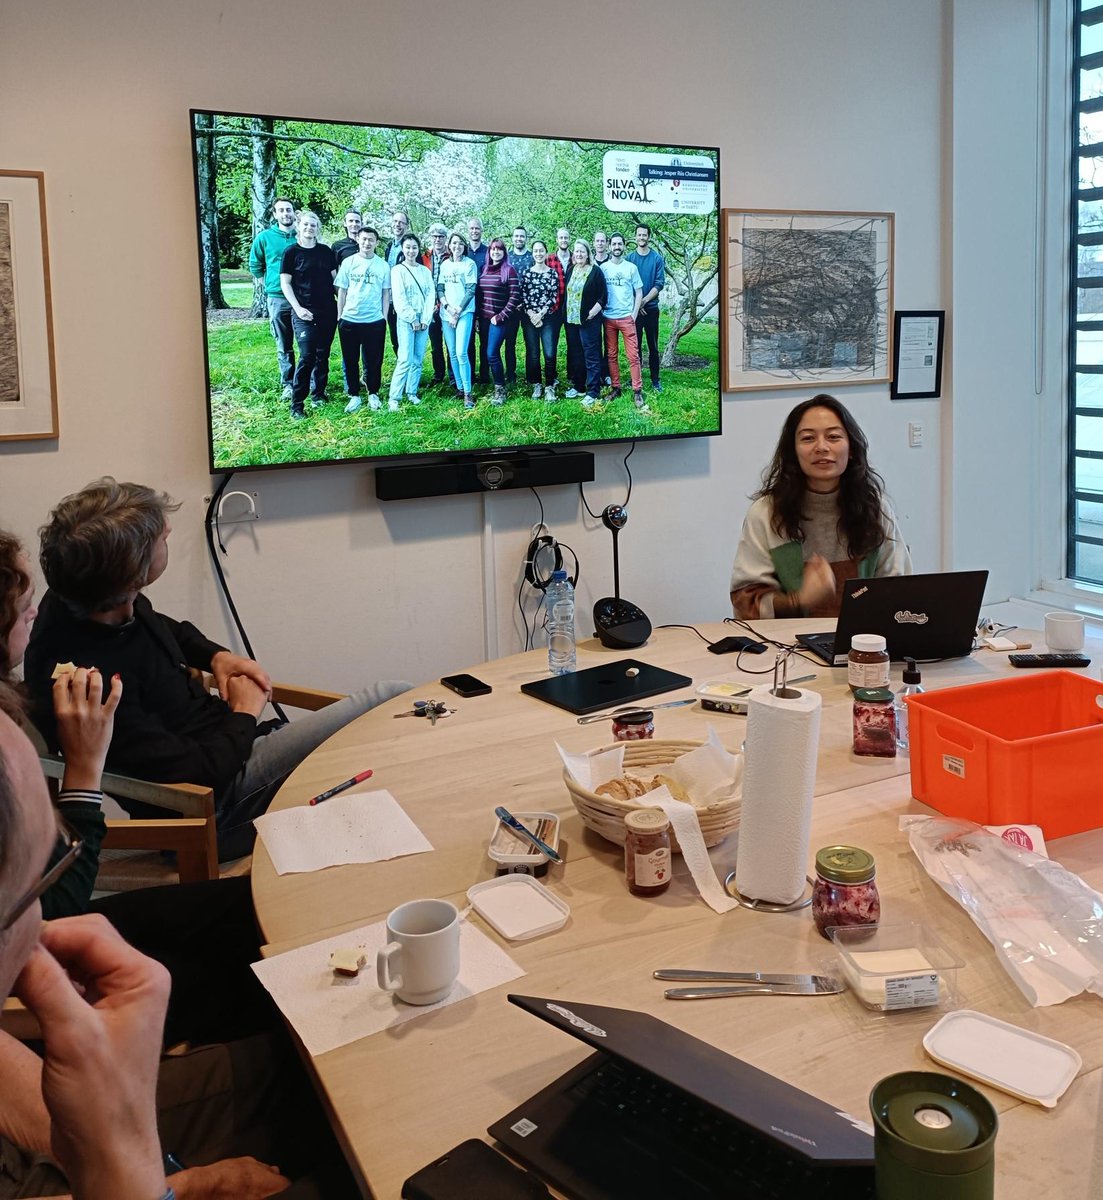 Last week, @SofiaIFGomes visited the SilvaNova team at KU🌟! We explored ideas for present and future research within Silva Nova🦠🍄🌳and dove into #soilmicrobiome data analyses. Thanks for the good discussions and input @SofiaIFGomes #Collaboration #ResearchTalks.